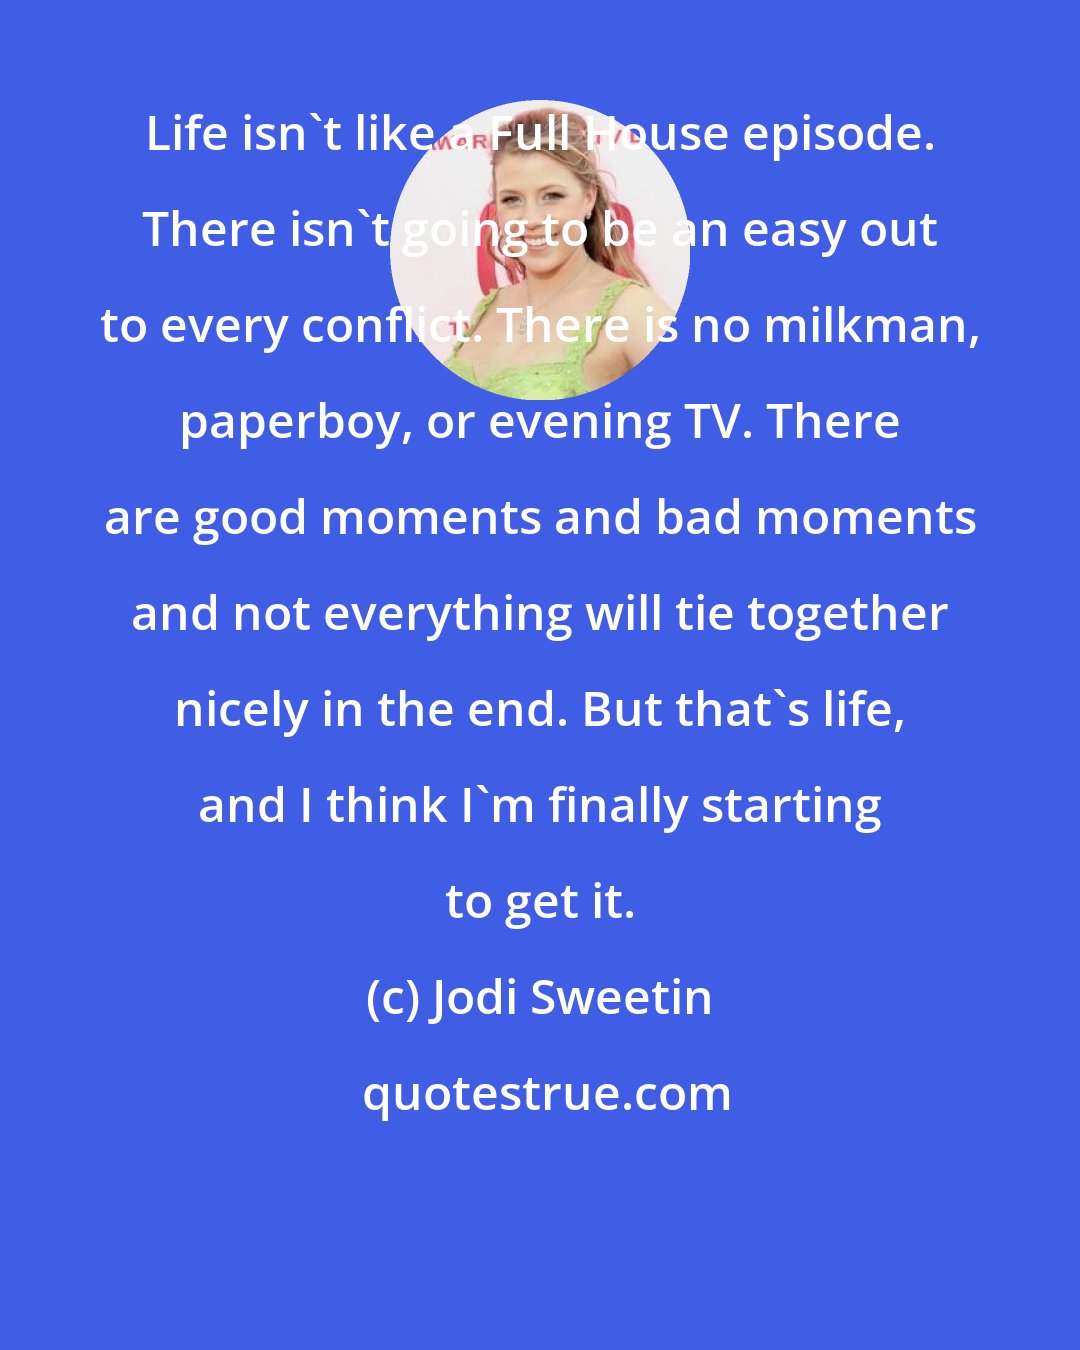 Jodi Sweetin: Life isn't like a Full House episode. There isn't going to be an easy out to every conflict. There is no milkman, paperboy, or evening TV. There are good moments and bad moments and not everything will tie together nicely in the end. But that's life, and I think I'm finally starting to get it.